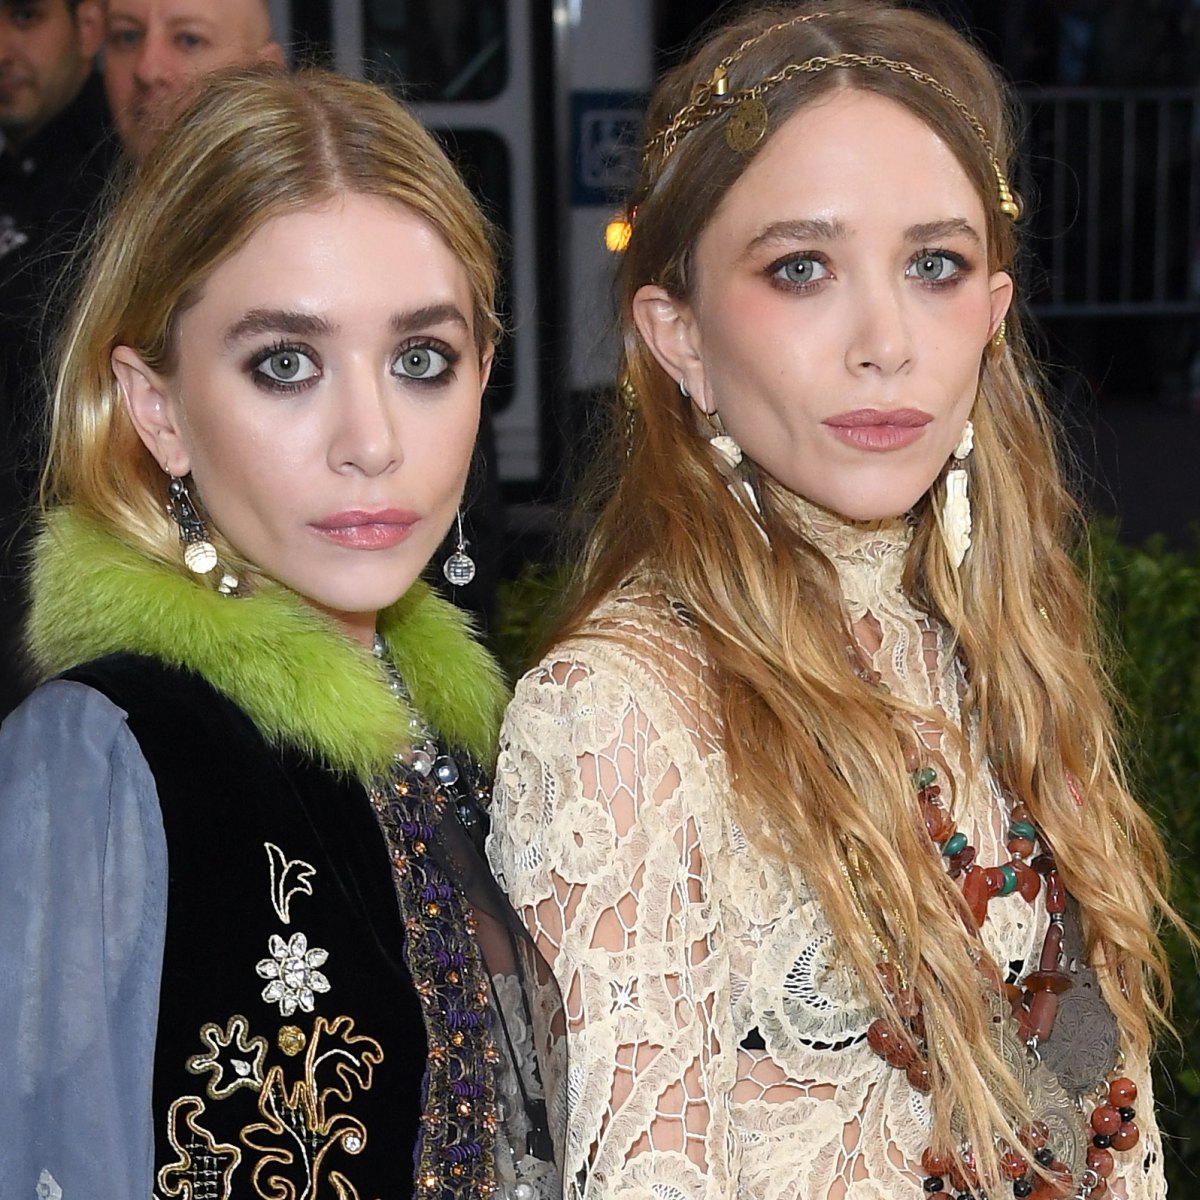 Olsen Twins Look Alike Porn - Olsen Twins: Weird, Odd Moments From Mary-Kate and Ashley